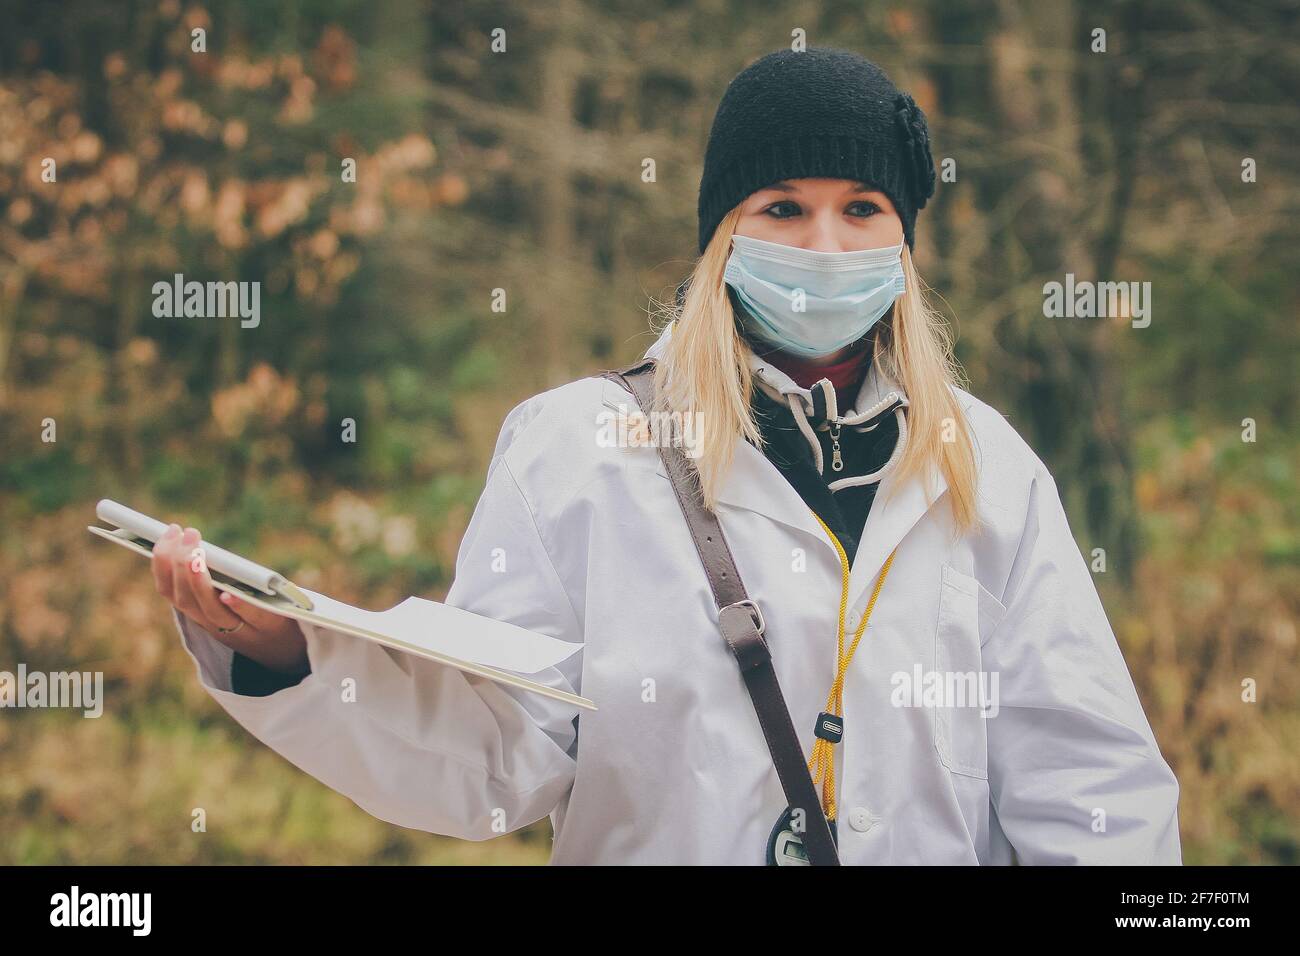 Young woman with blonde hair dressed as a doctor and a breathing face mask is standing outside in a cold autumn like forest. Stock Photo